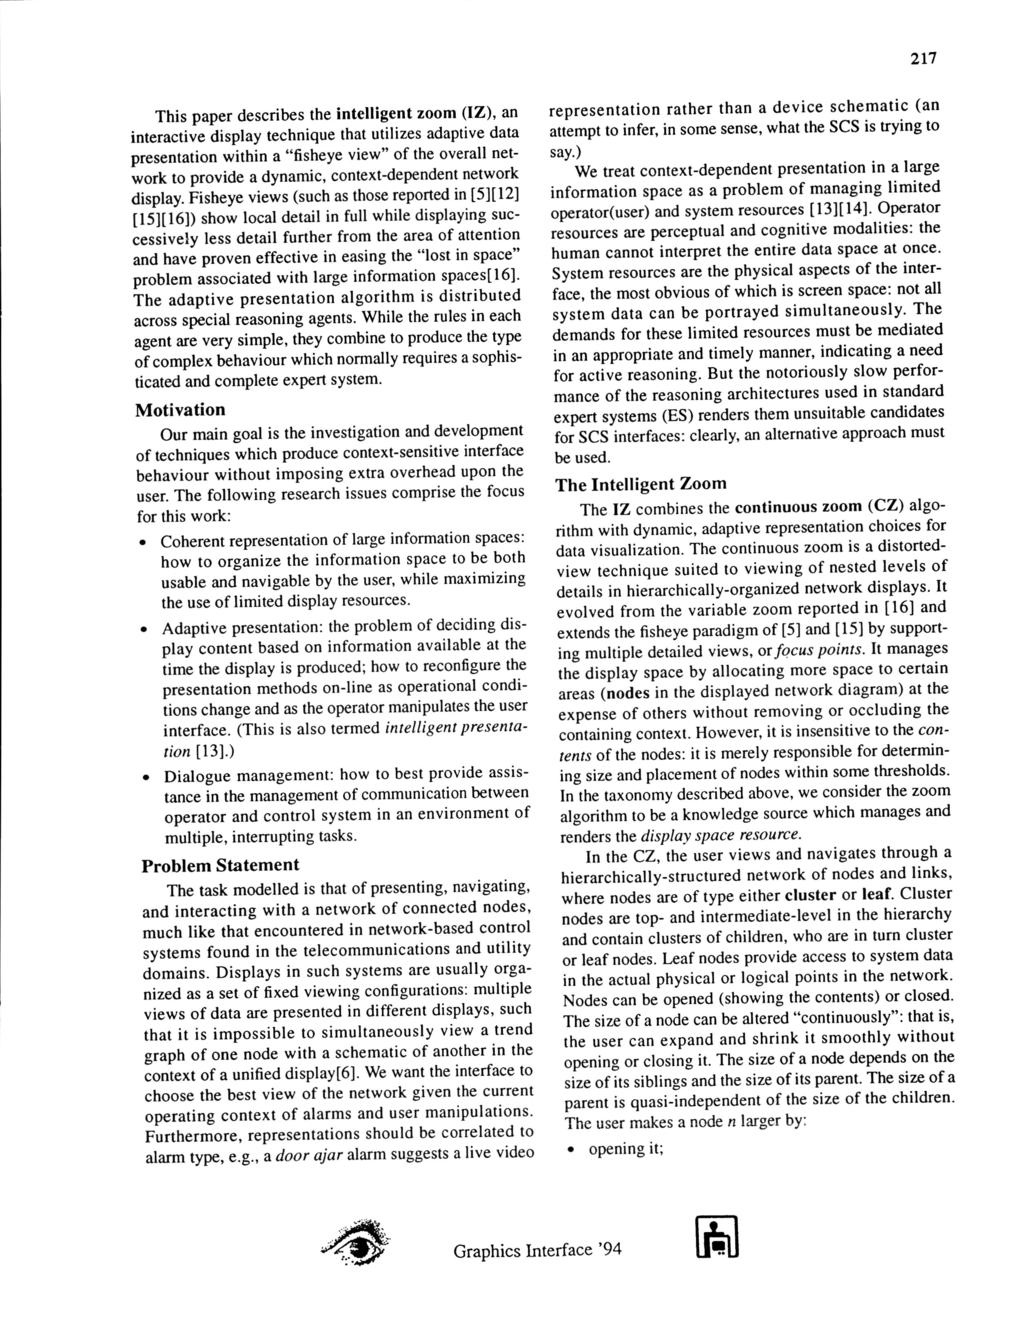 217 This paper describes the intelligent zoom (IZ), an interactive display technique that utilizes adaptive data presentation within a "fisheye view" of the overall network to provide a dynamic,